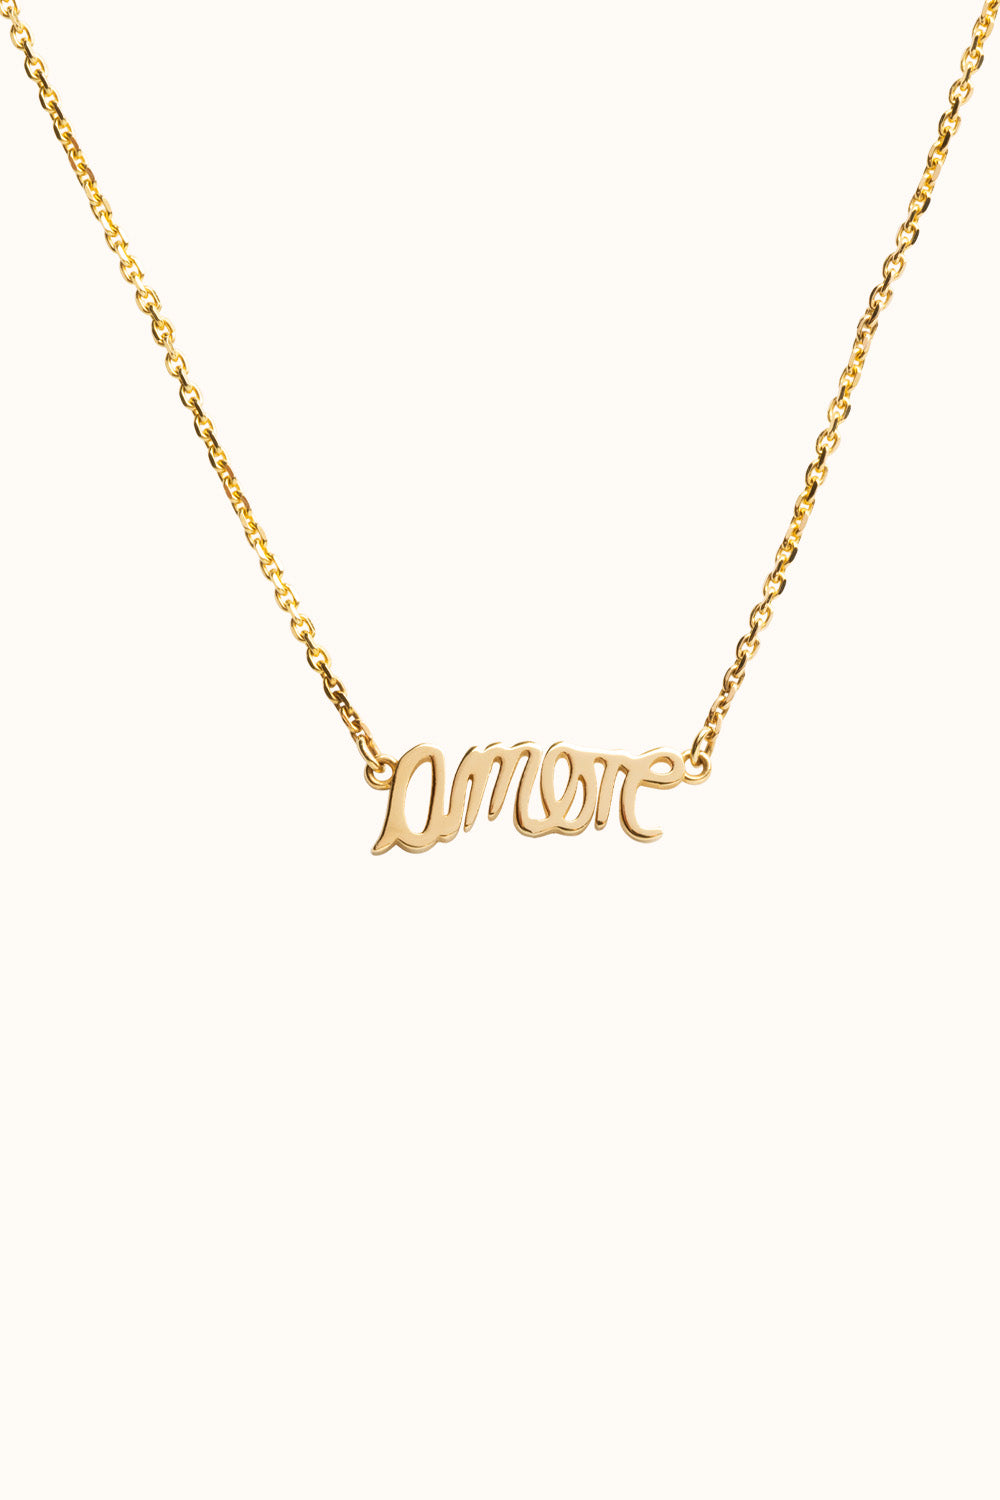 The 14k gold Amore chain